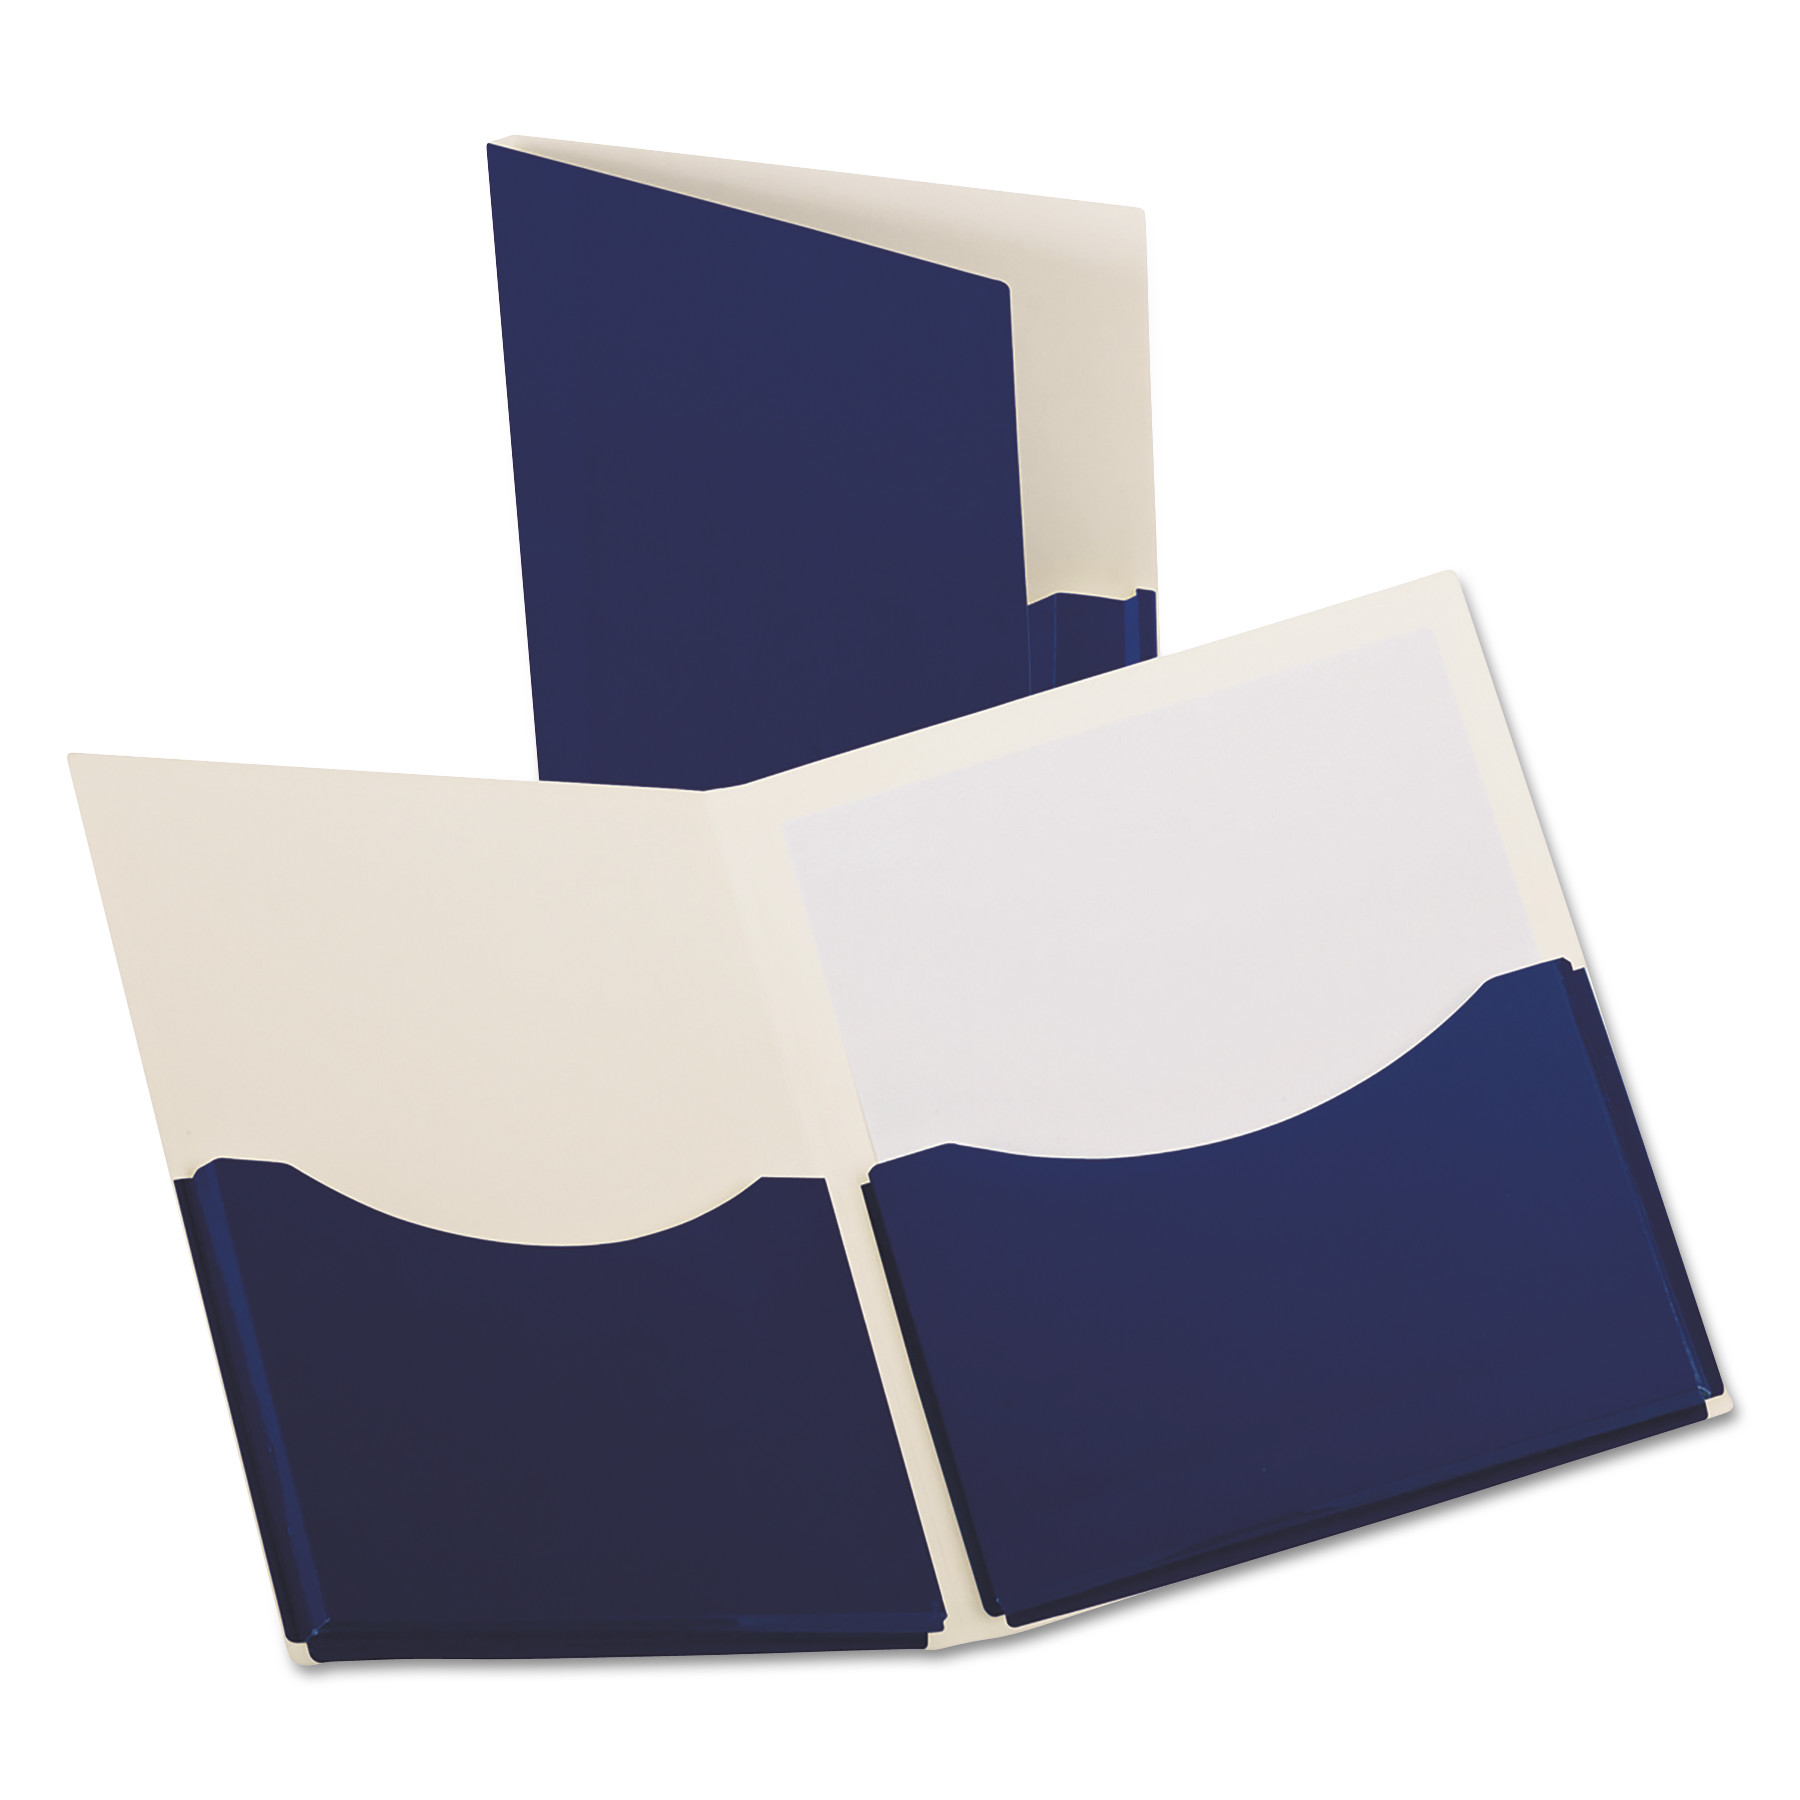  Oxford 54443 Double Stuff Gusseted 2-Pocket Laminated Paper Folder, 200-Sheet Capacity, Navy (OXF54443) 